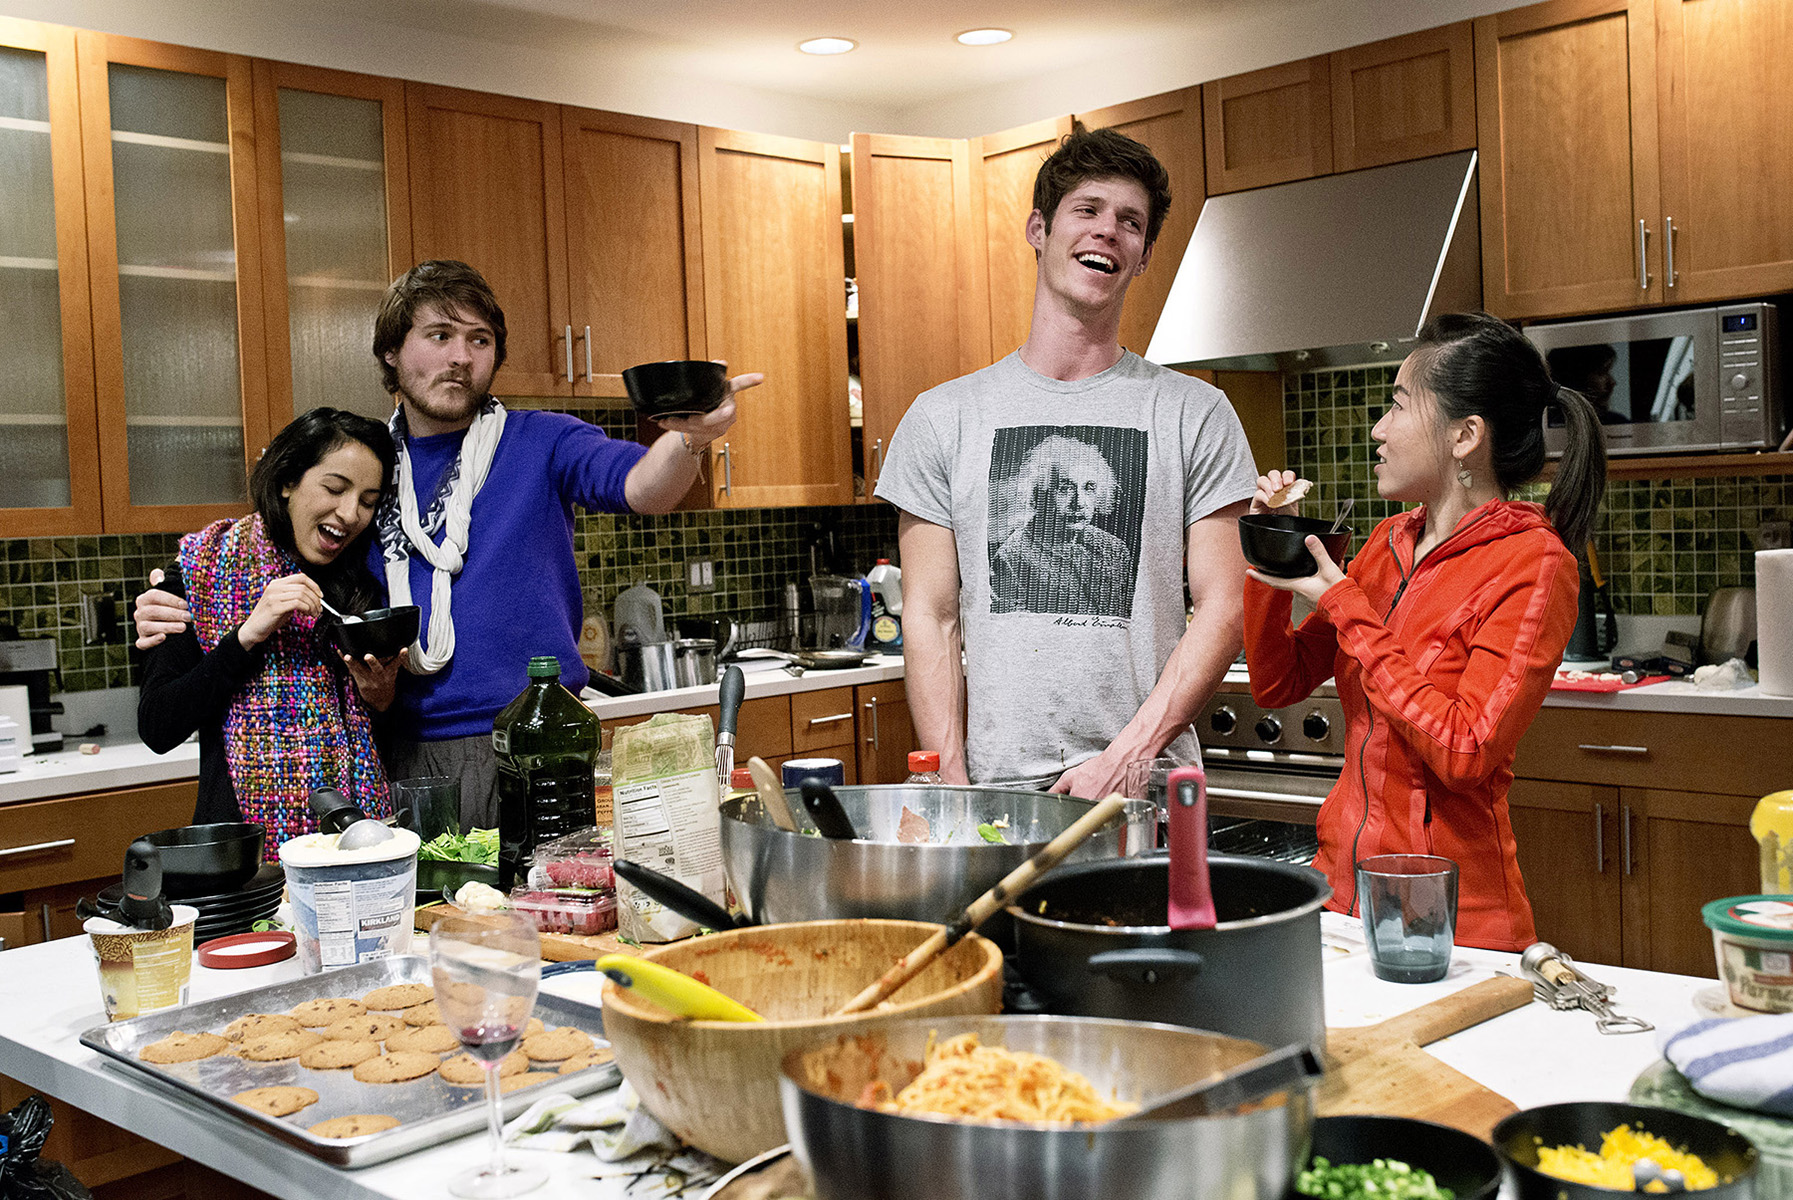 Noor Siddiqui, Conor White-Sullivan, Dylan Enright and Karen X. Cheng, seen left to right, eat dessert during a dinner party hosted by the company WeFunder at their office in San Francisco, California in February 2015. WeFunder is a crowdfunding service that connects start-ups and investors through the internet. The company and it’s founders throw large dinner parties almost every Wednesday for friends and guests from the industry at their office, which also serves as the home of several company employees.